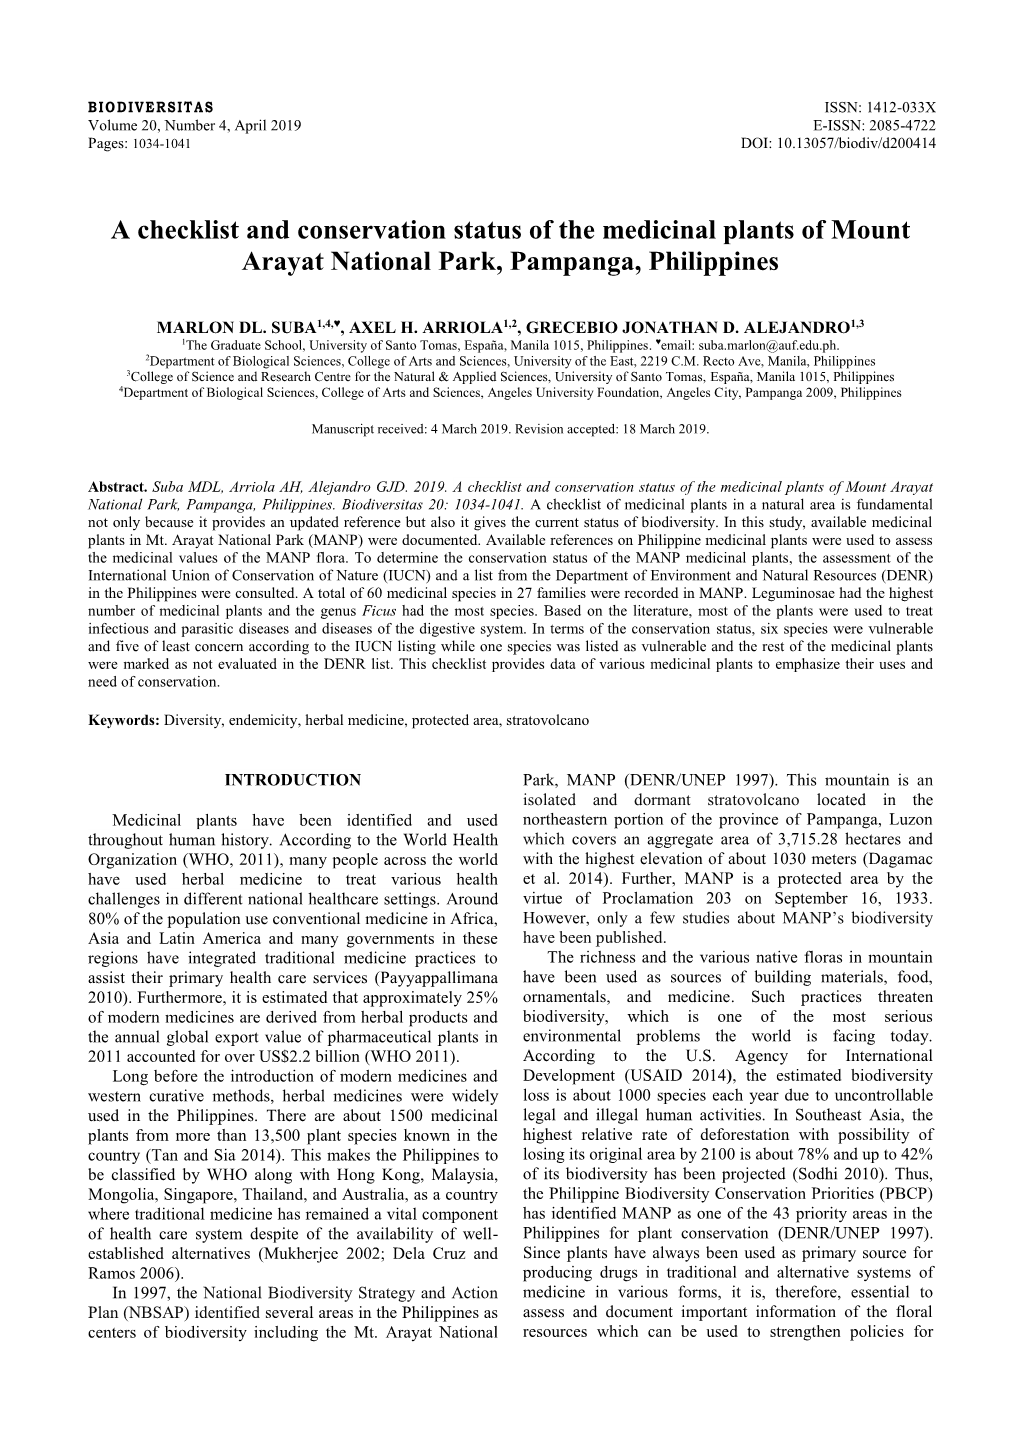 A Checklist and Conservation Status of the Medicinal Plants of Mount Arayat National Park, Pampanga, Philippines